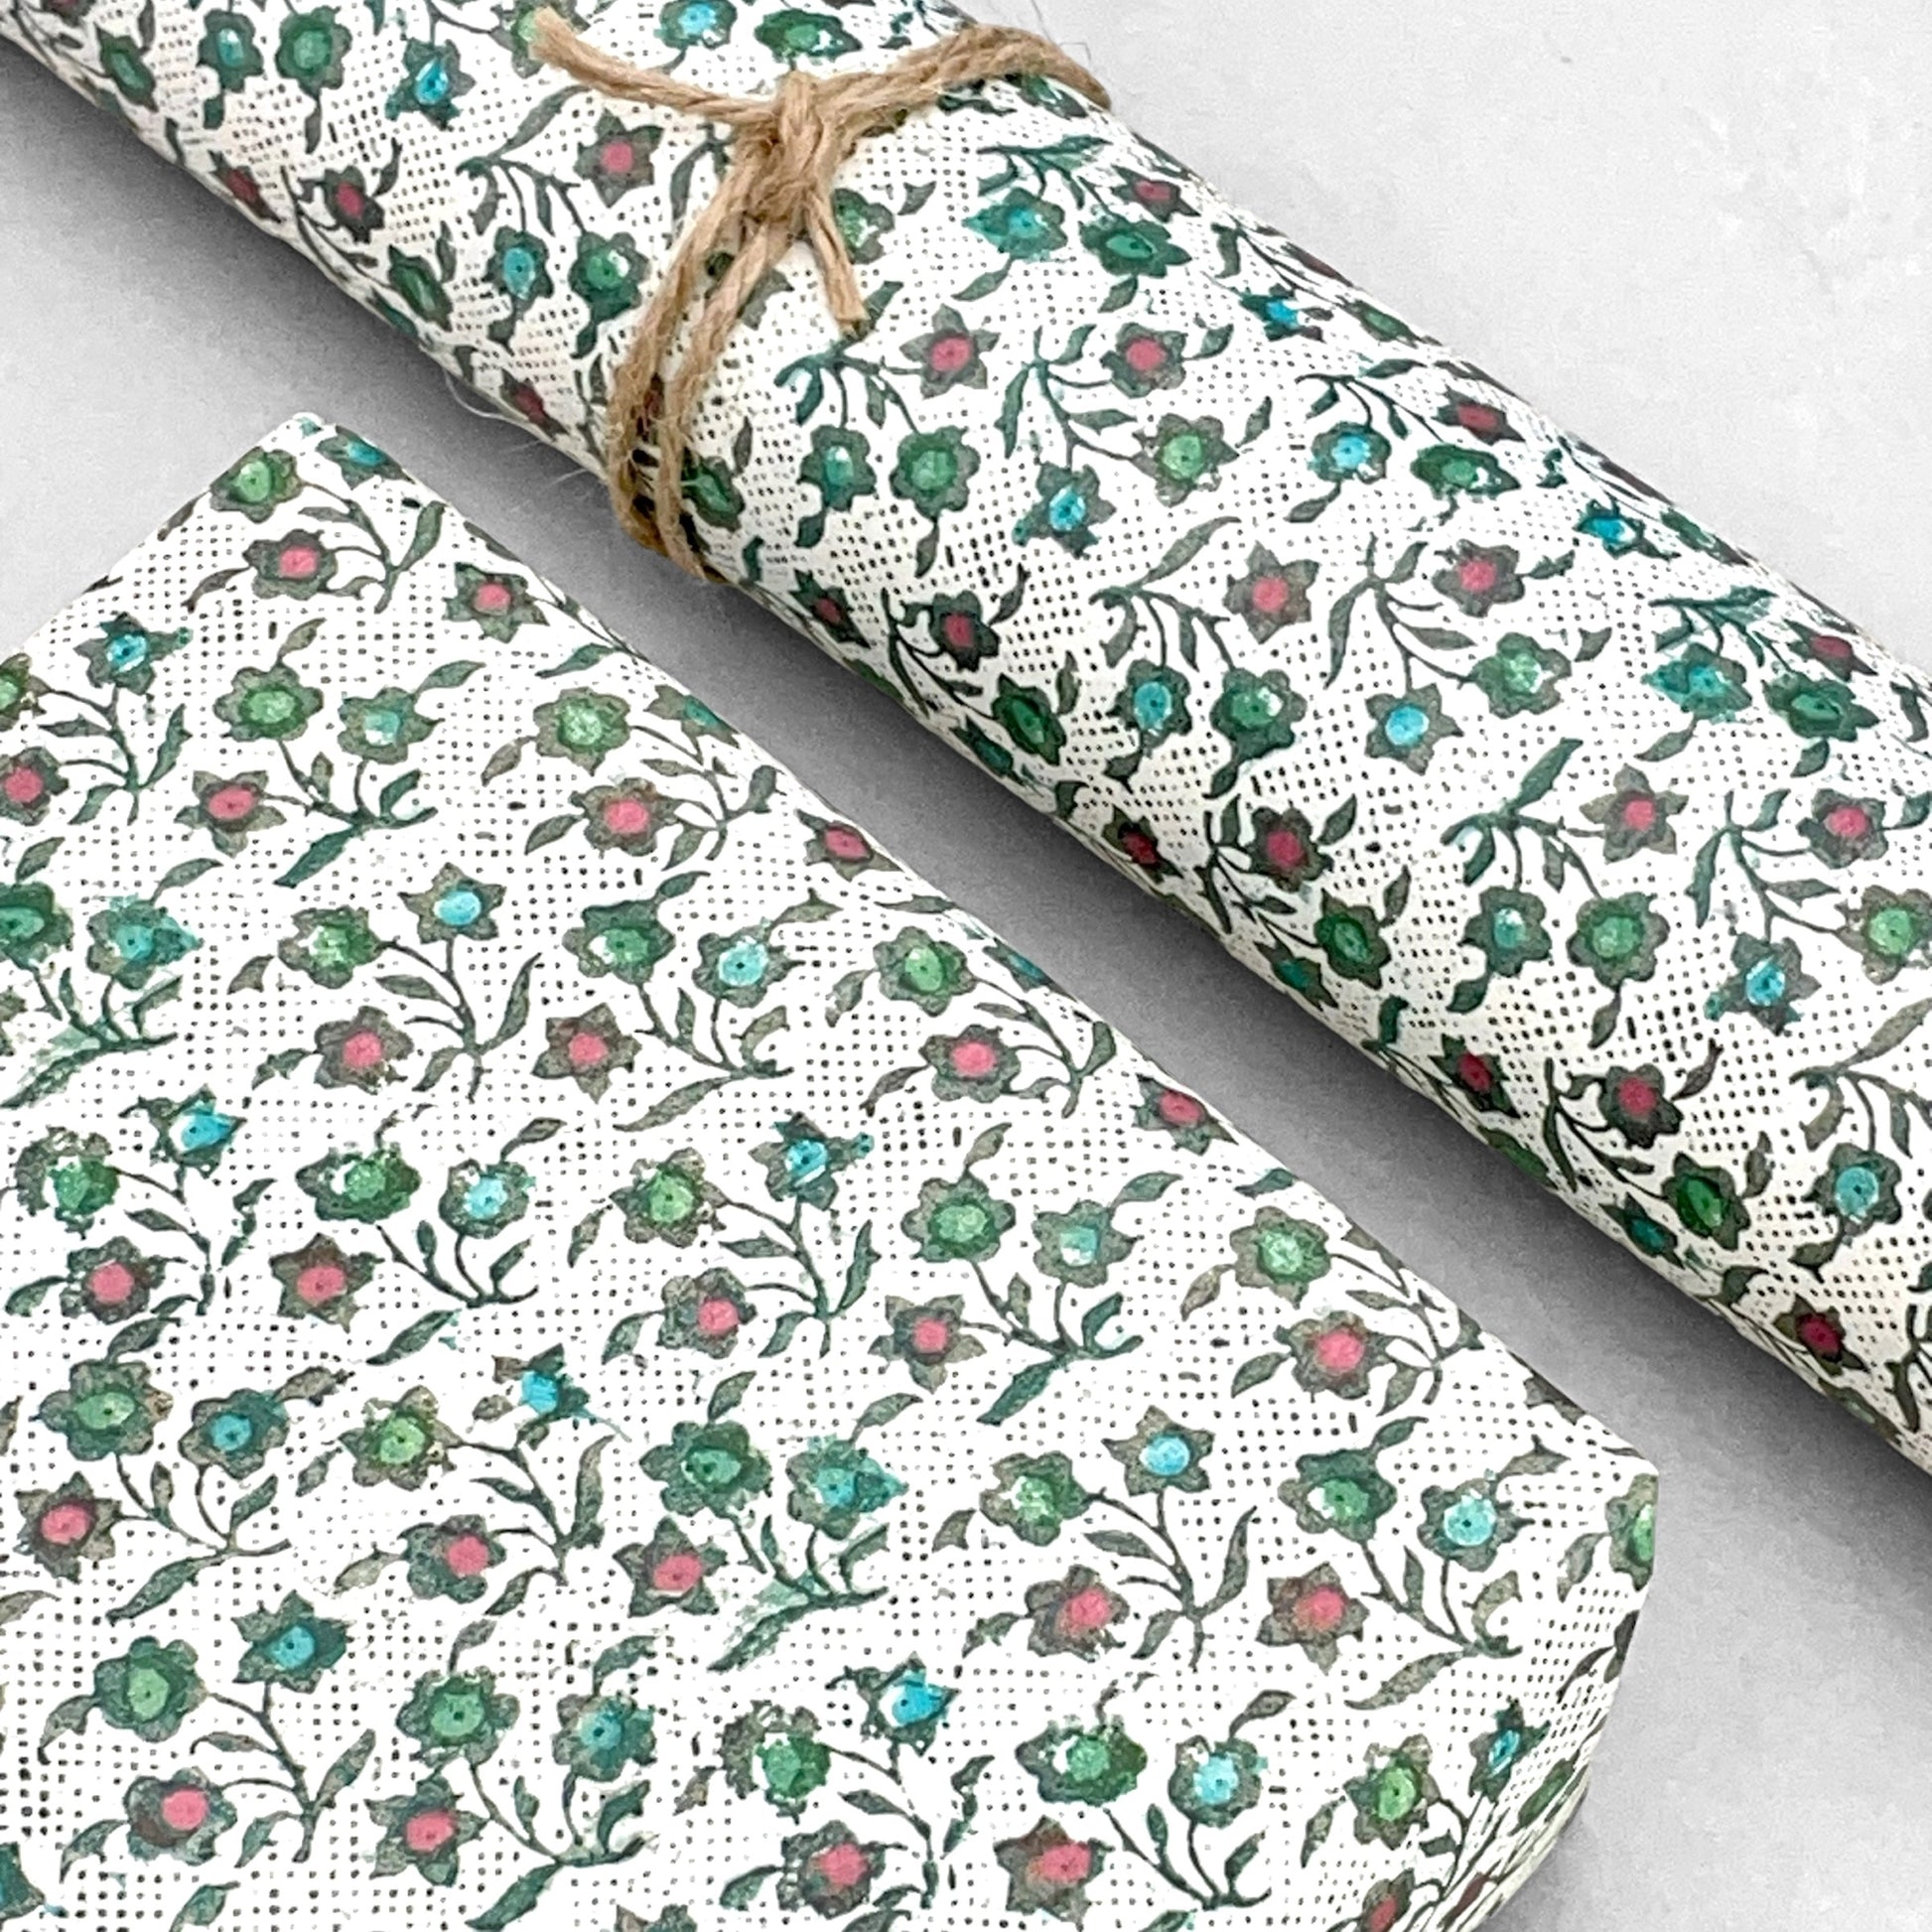 italian Remondini patterned wrapping paper by Tassotti.  Little floral repeat pattern of block print style flowers in blue, red and green on a white background